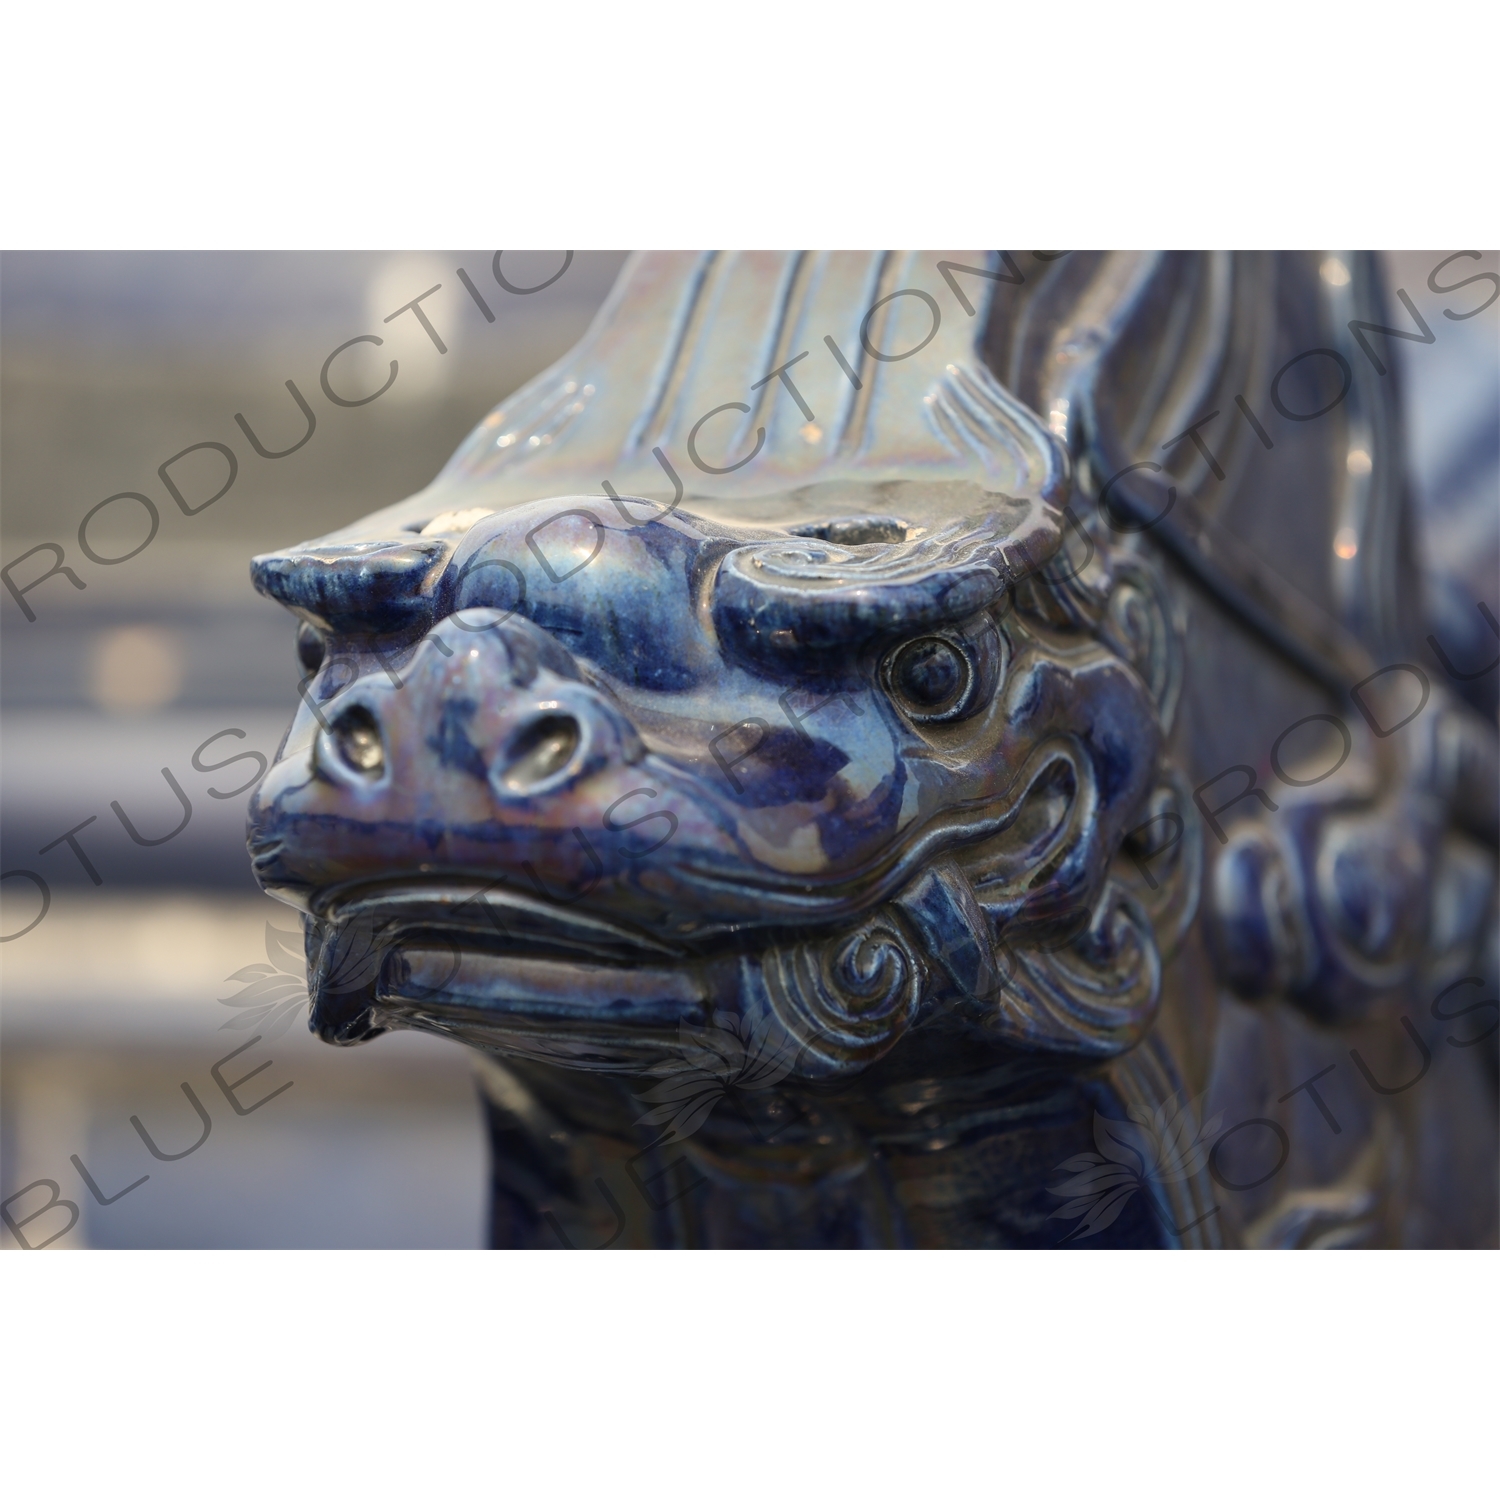 Glazed Dragon Wall Tiles in the Circular Mound Altar (Yuanqiu Tan) Compound in the Temple of Heaven (Tiantan) in Beijing